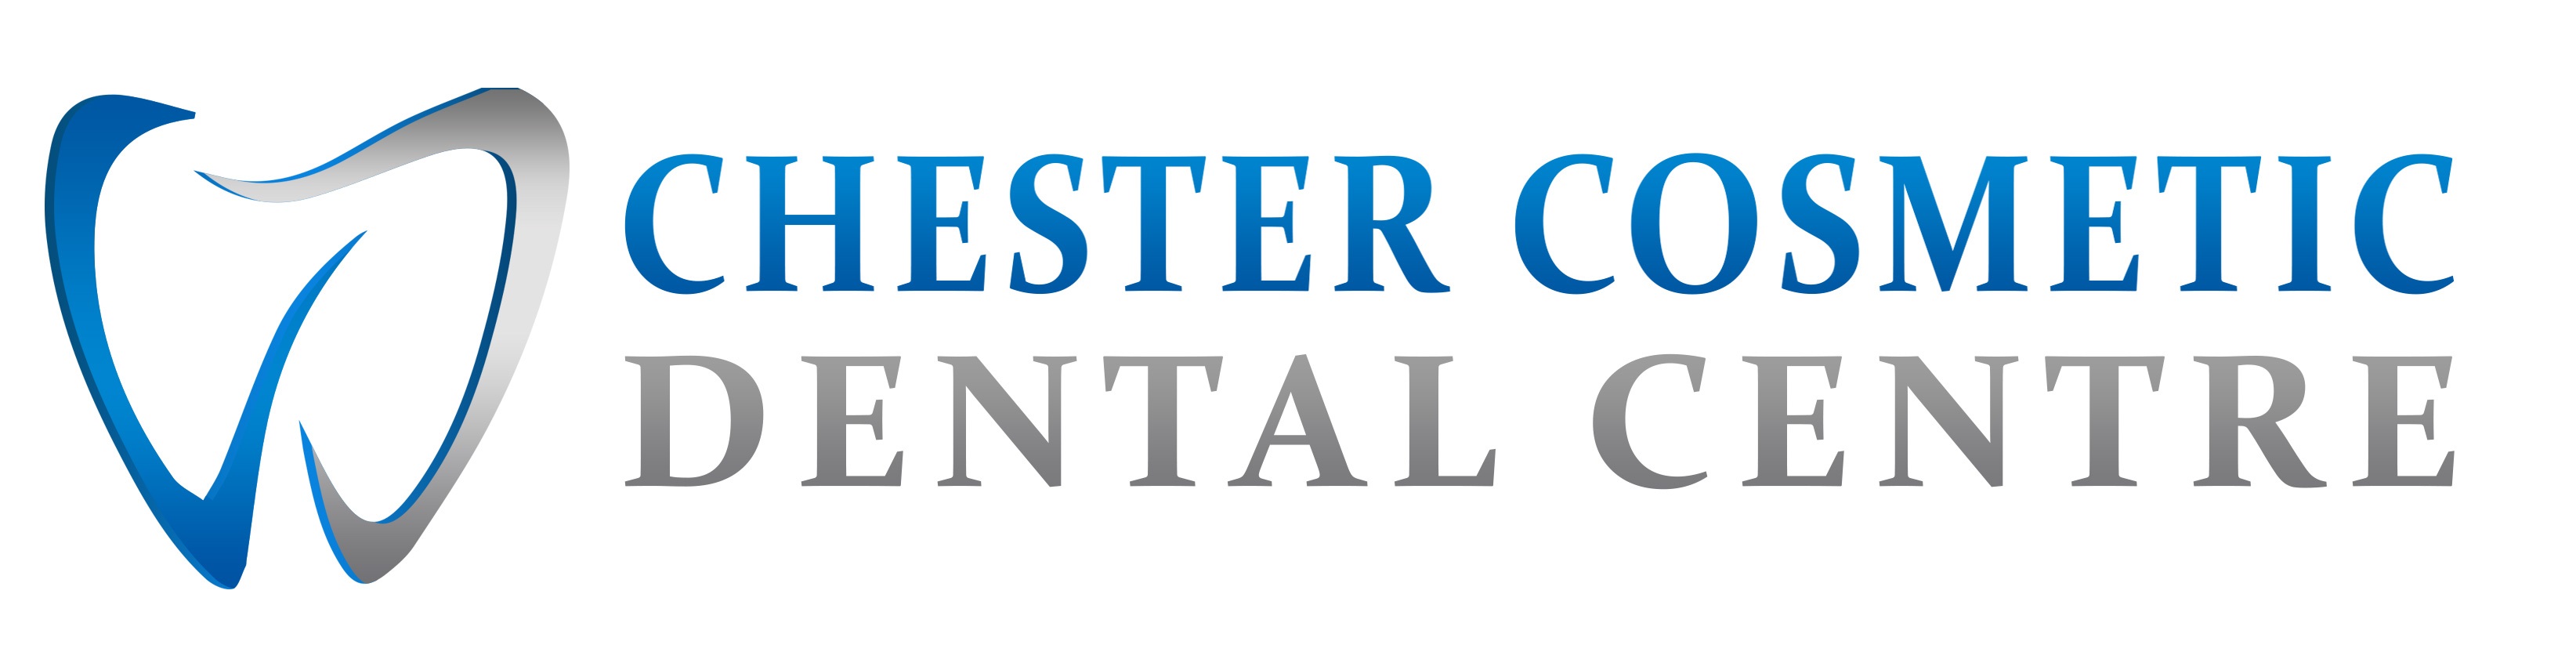 Chester Cosmetic Dental Centre